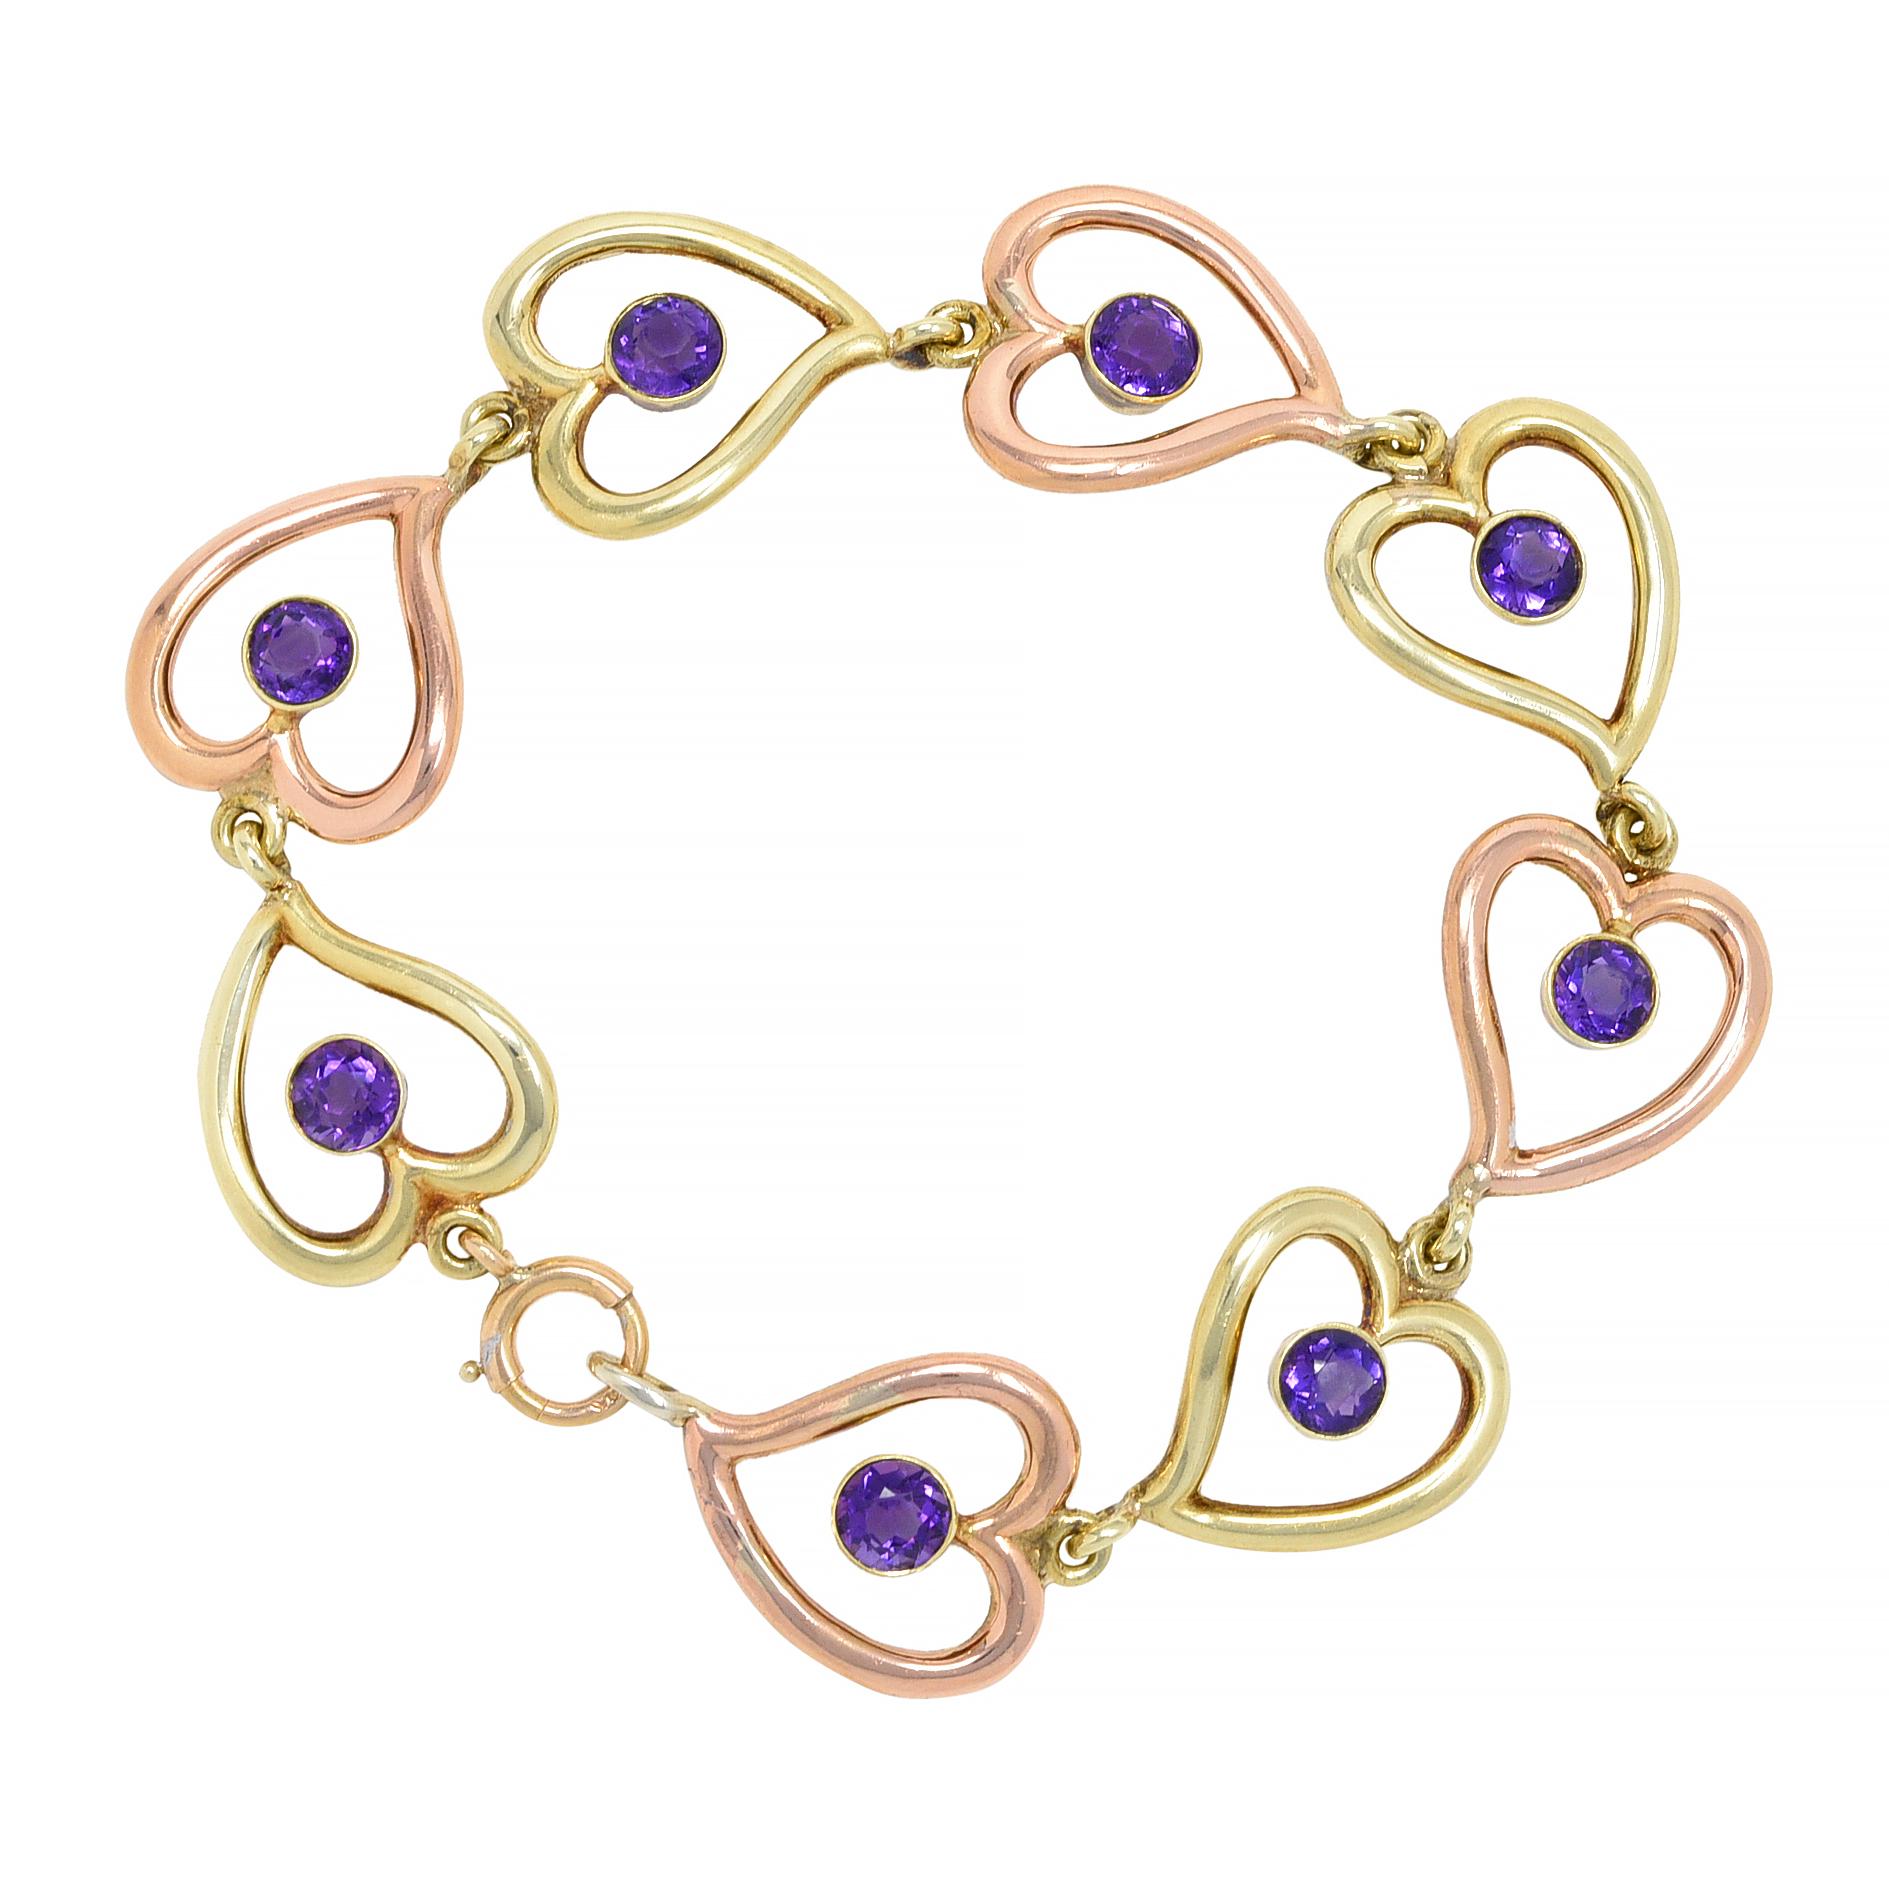 Comprised of pierced heart-shaped links alternating with rose and yellow gold 
Each centering a round cut amethyst - transparent medium purple 
Measuring 5.0 mm round and bezel set
Completed by a spring clasp closure
Stamped for 14 karat gold